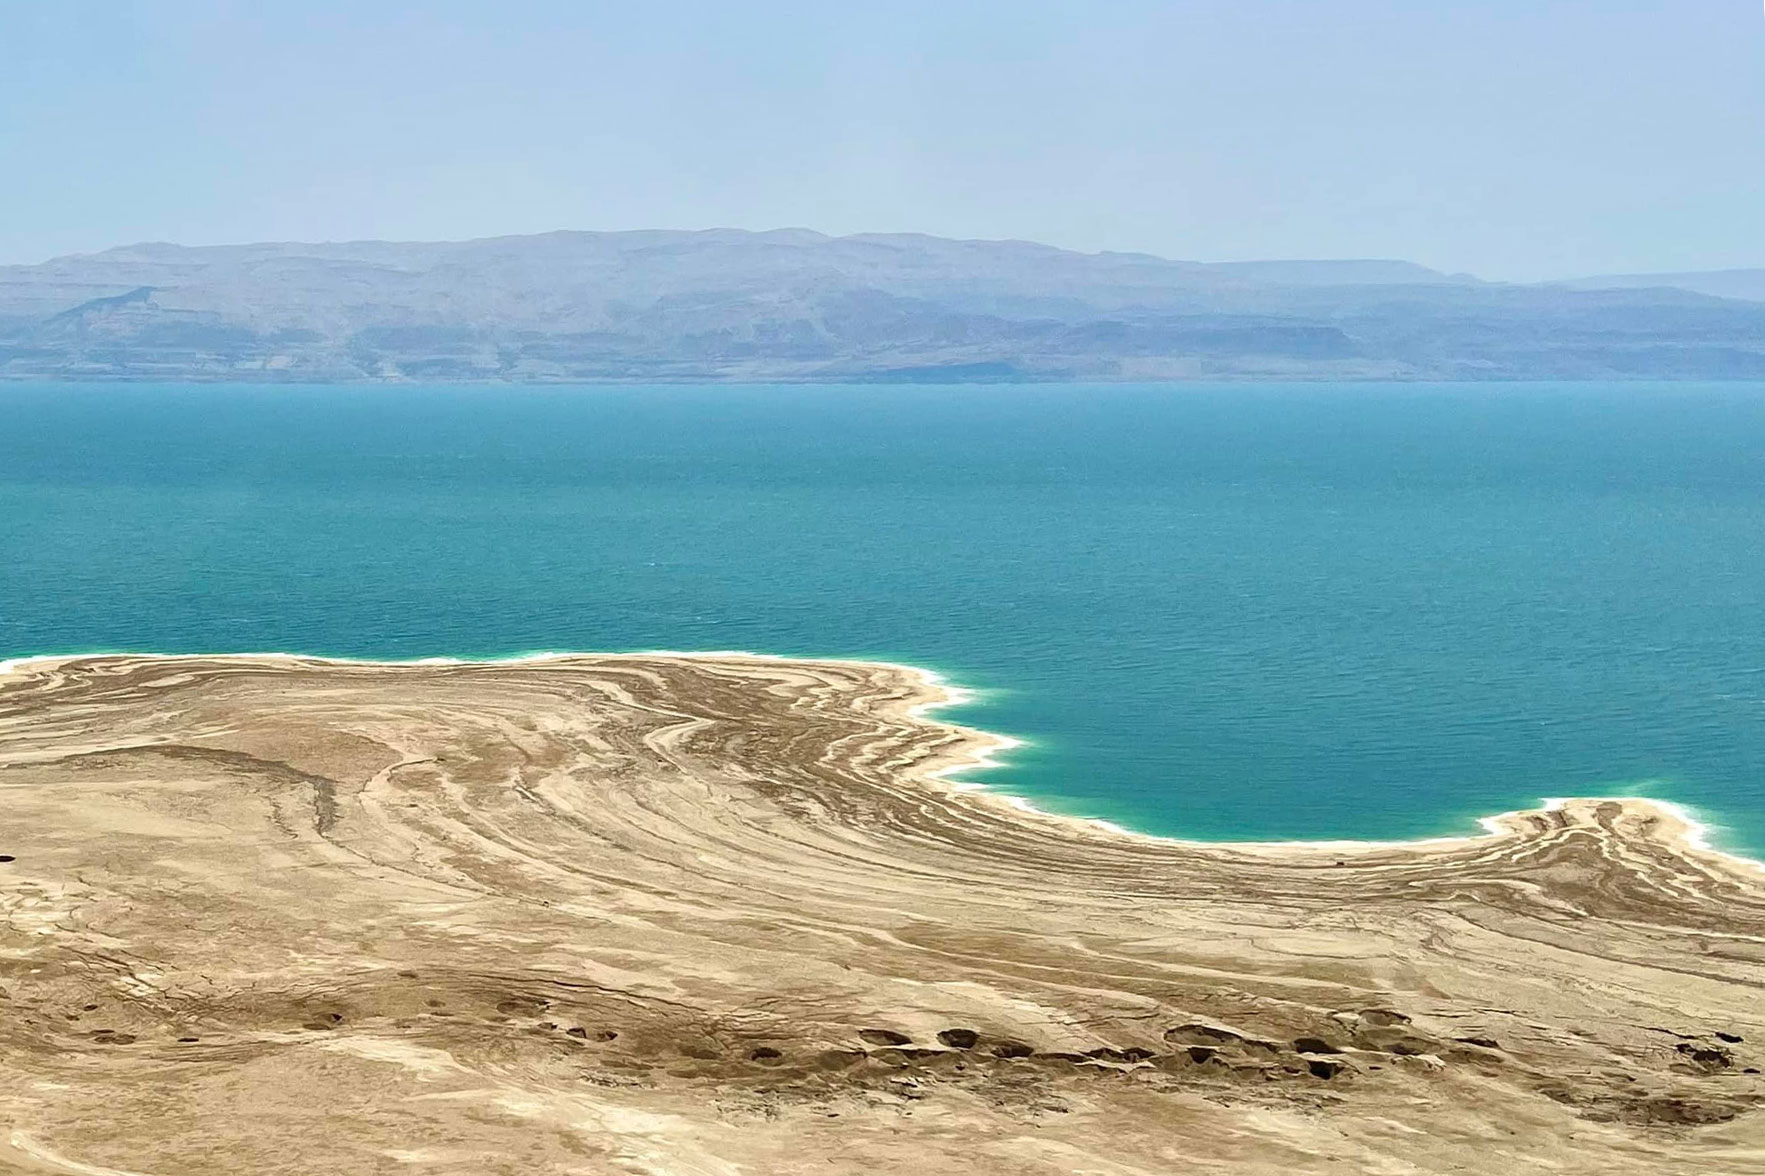 Aerial view of the Dead Sea